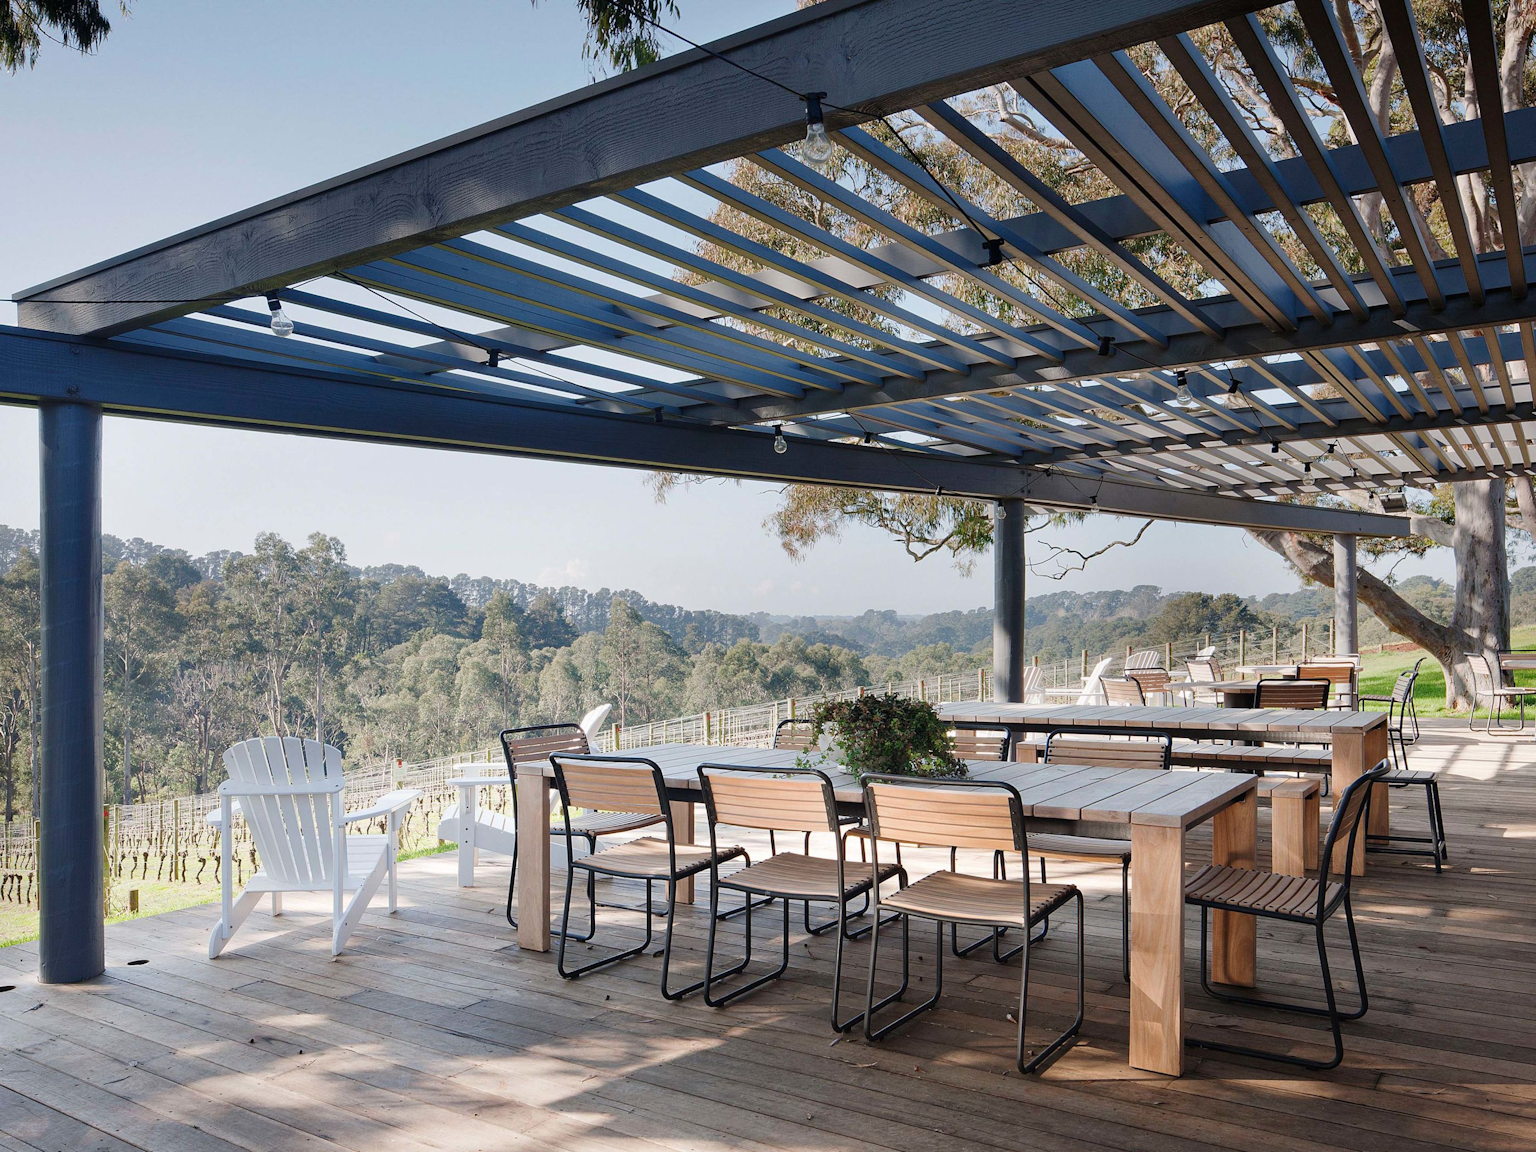 Polperro winery outdoor space overlooking the vineyards, showing Turon dining chairs and the Bronte outdoor dining table